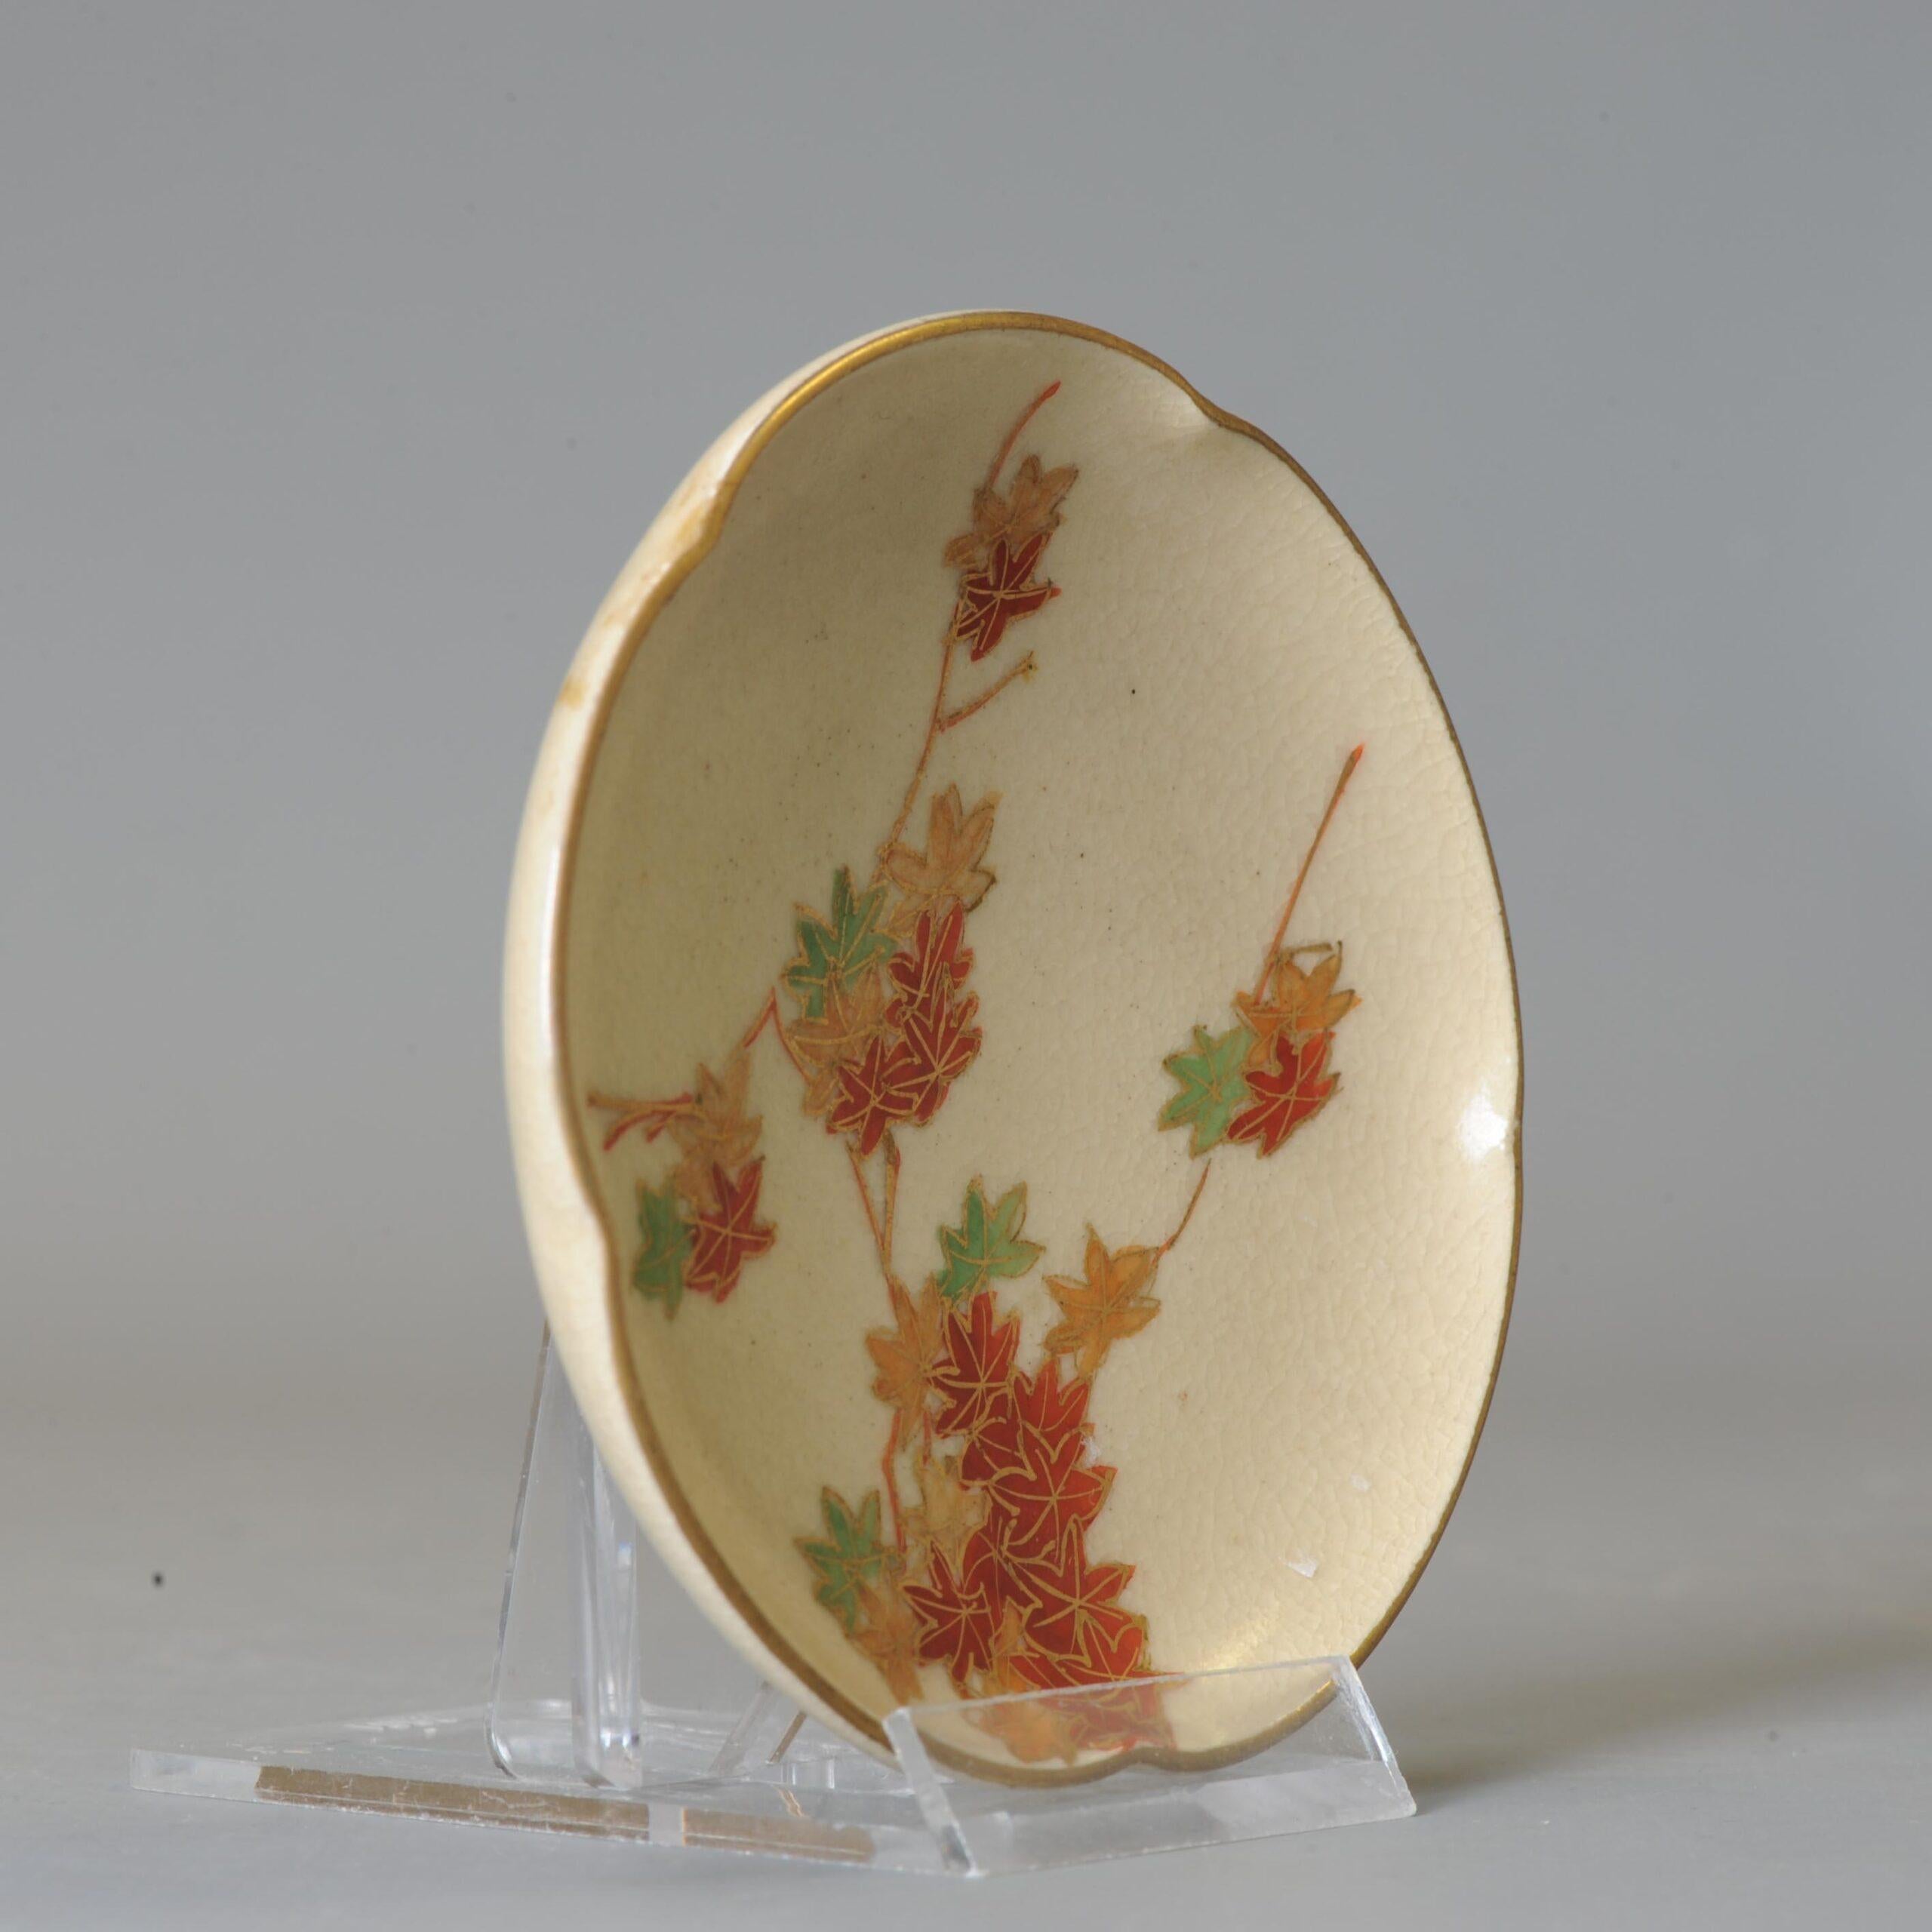 Lovely and small Satsuma dish.

Additional information:
Material: Porcelain & Pottery
Type: Vase
Japanese Style: Kutani
Region of Origin: Japan
Period: 19th century Meiji Periode (1867-1912)
Age: 19th century
Original/Reproduction: